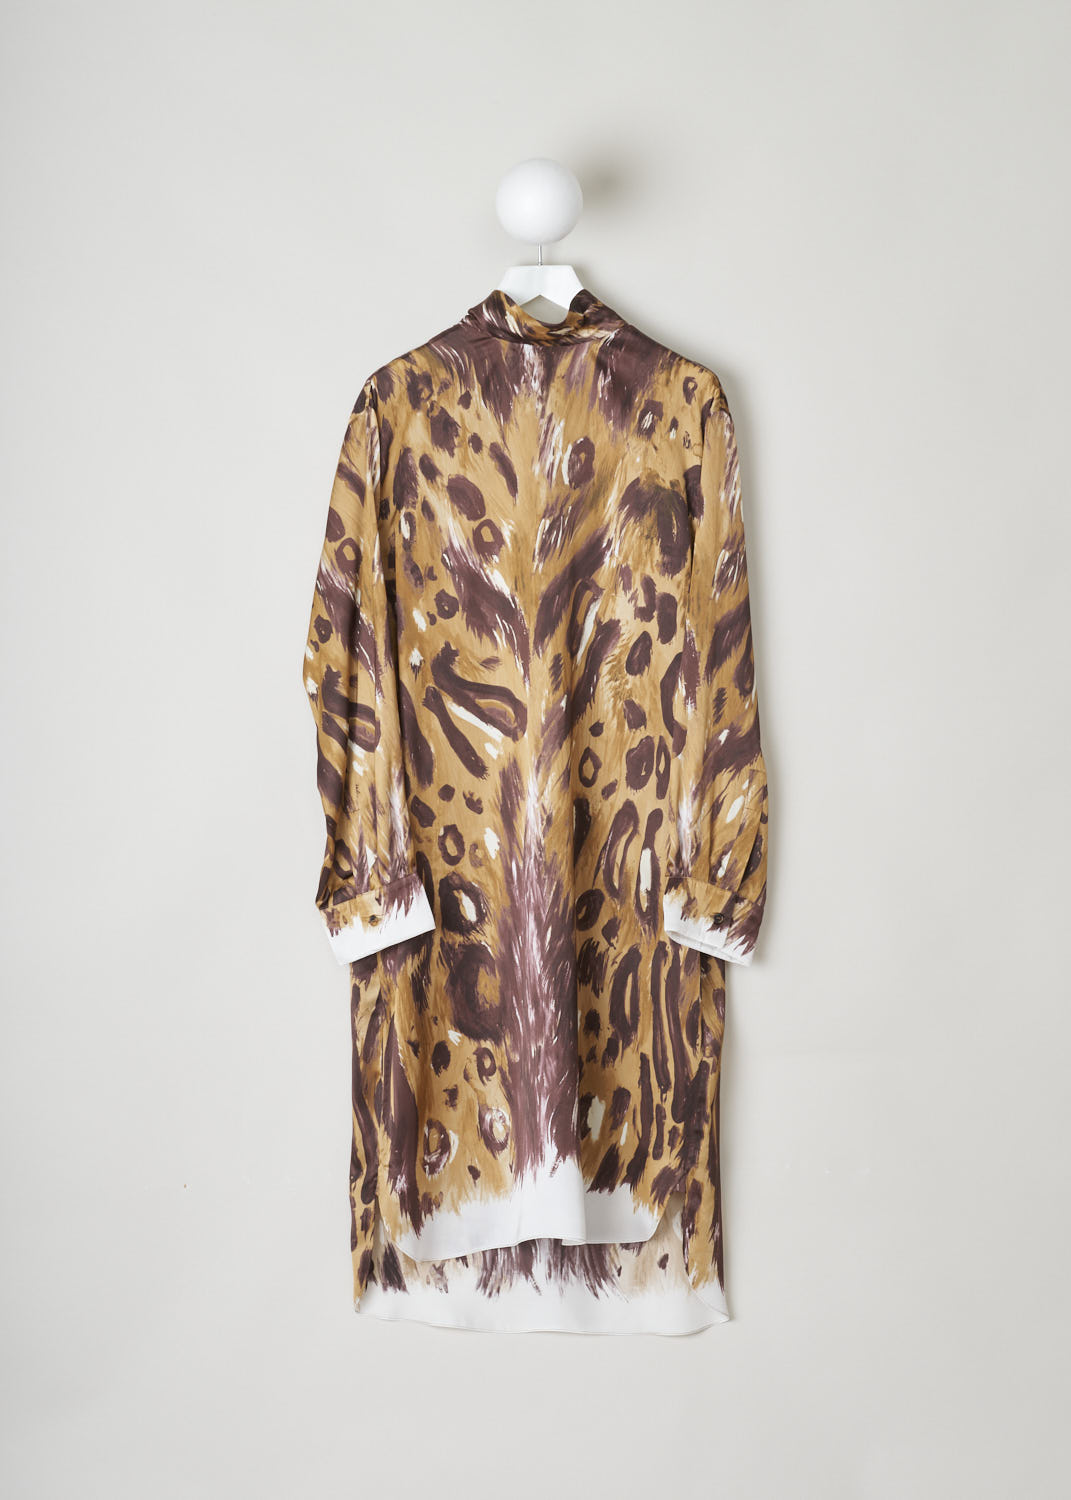 MARNI, ANIMAL PRINT SHIFT DRESS WITH SELF-TIE DETAIL, ABMA0859O0_UTV912_WBM20, Print, Brown, Front, This loose fitting midi dress is made in a satin animal print. Most noteworthy is the self-tie detail, with the ends draping along the back. The long sleeves had cuffed ends. The model has an asymmetrical finish, meaning the back is a little longer than the front. On either side, rounded slits can be found. Three buttons in the back function as the closure option.
